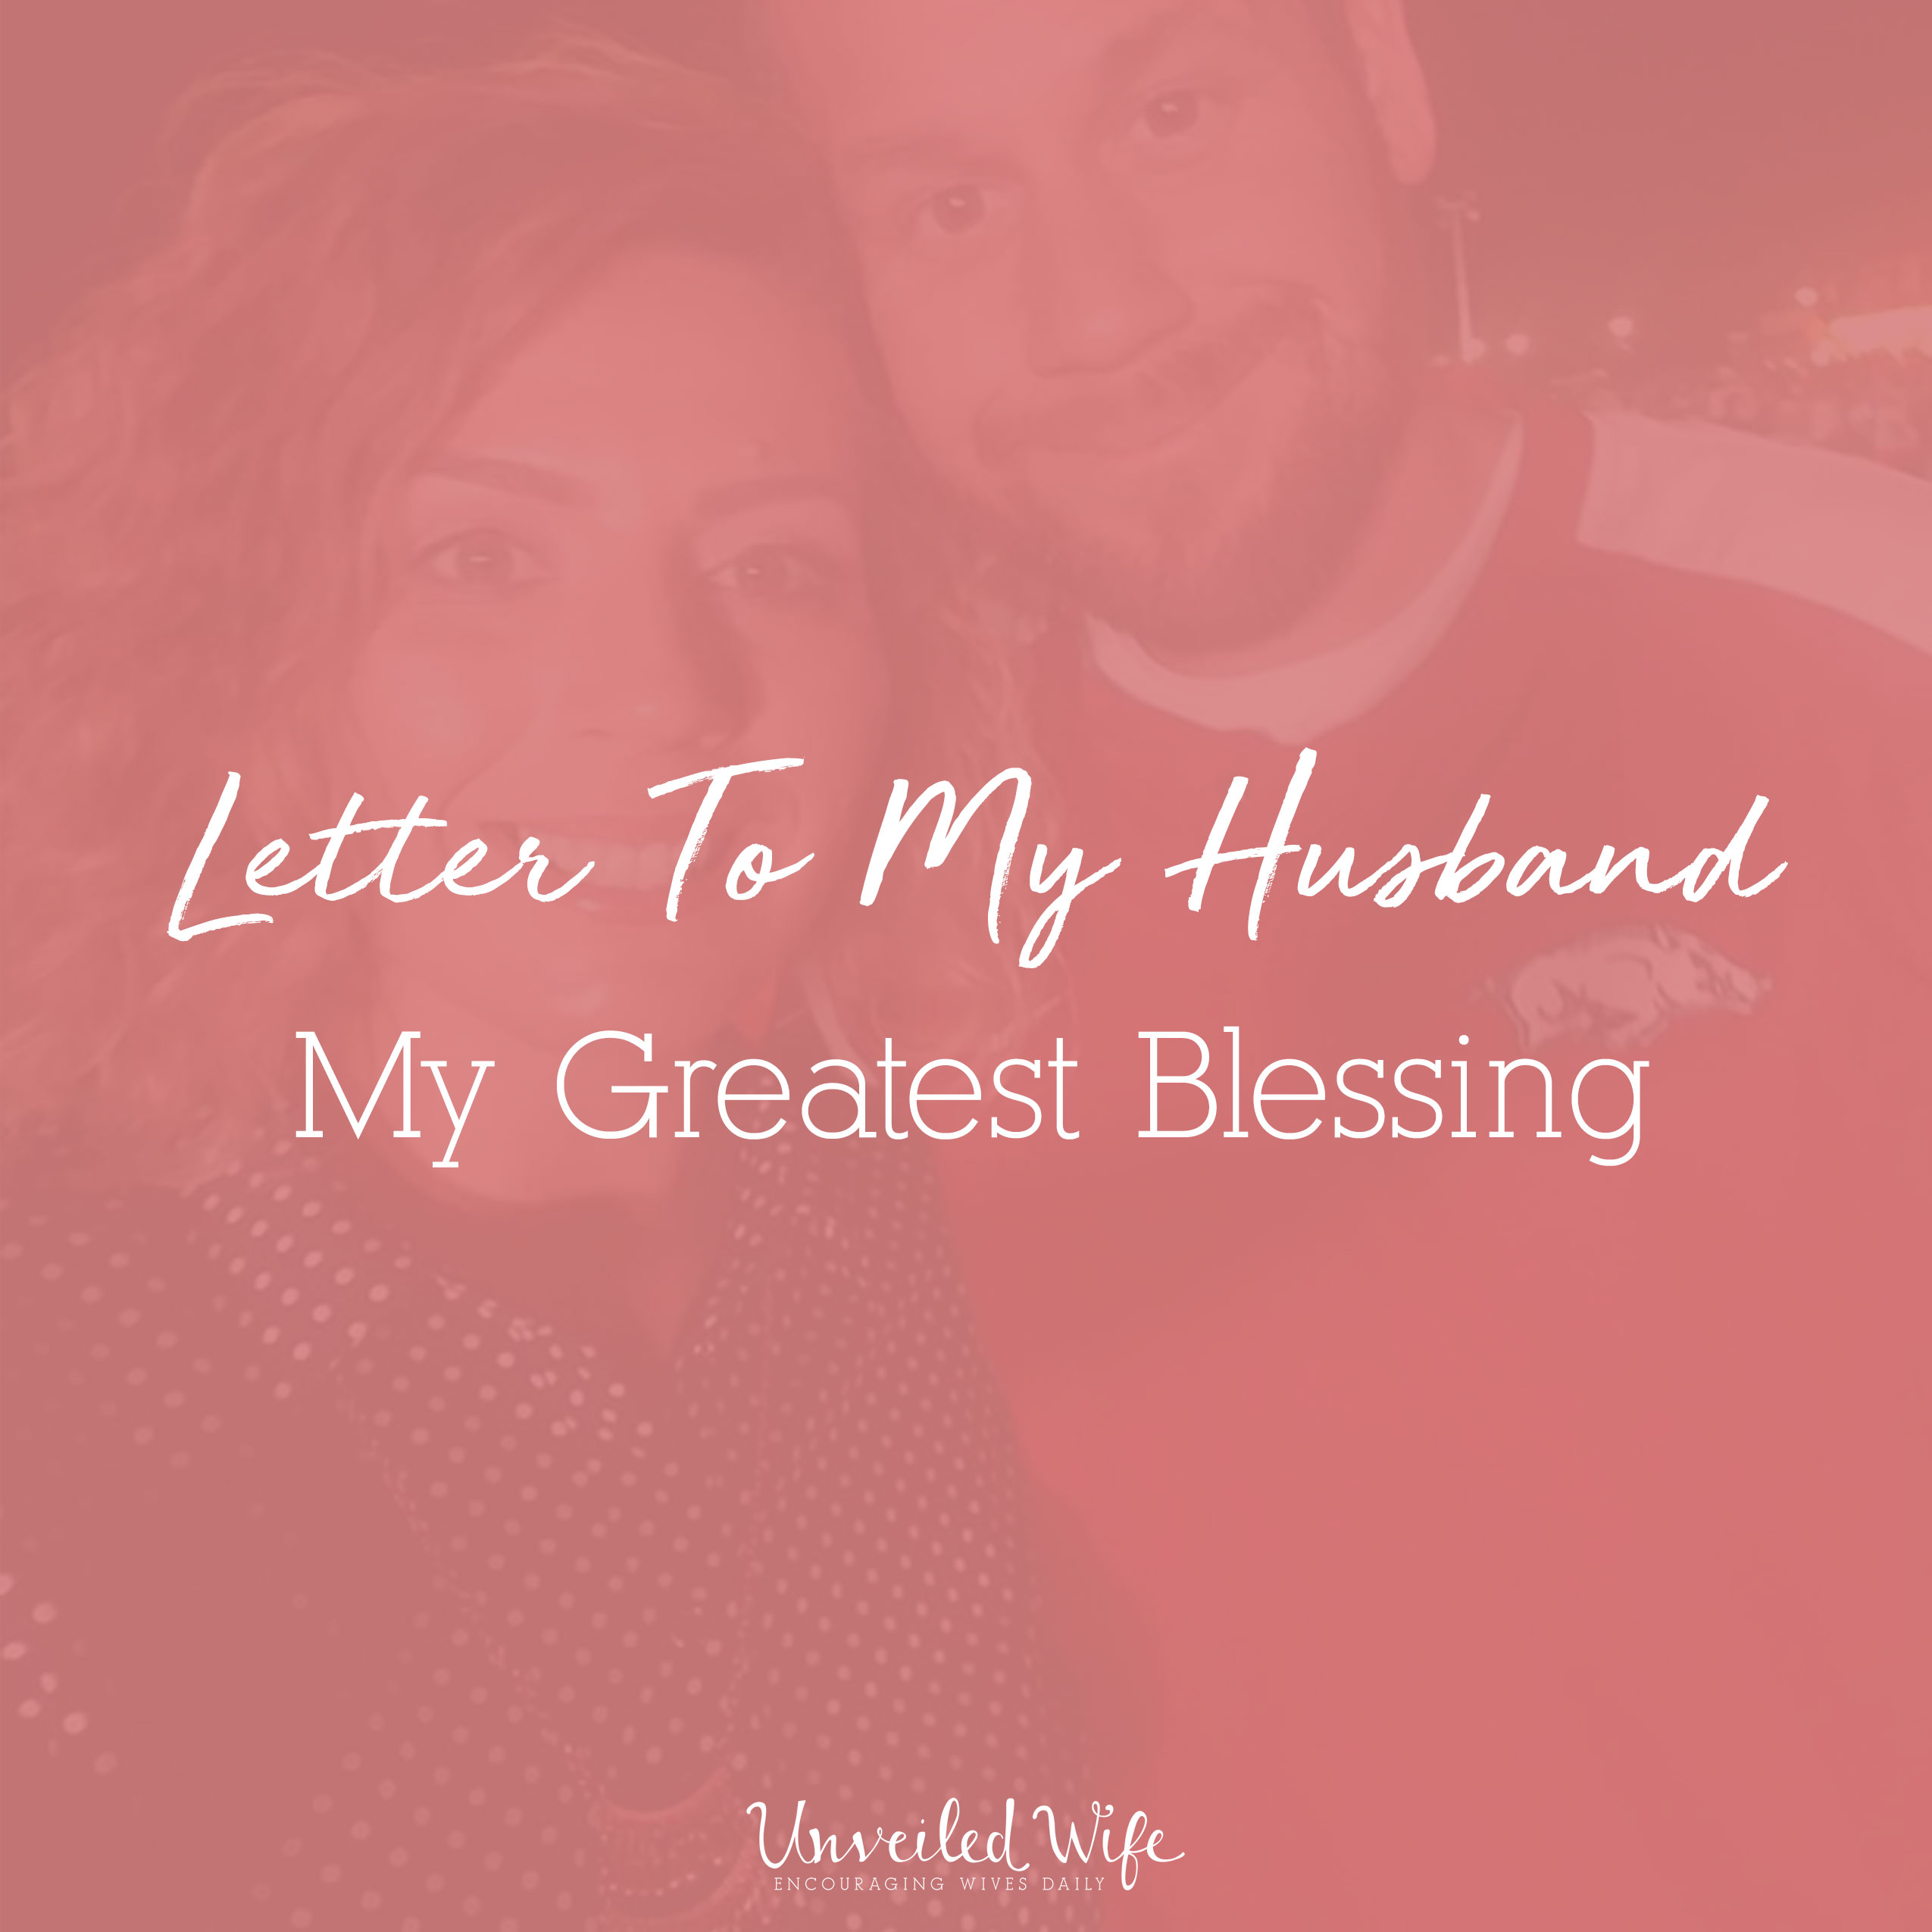 Letter To My Husband: My Greatest Blessing